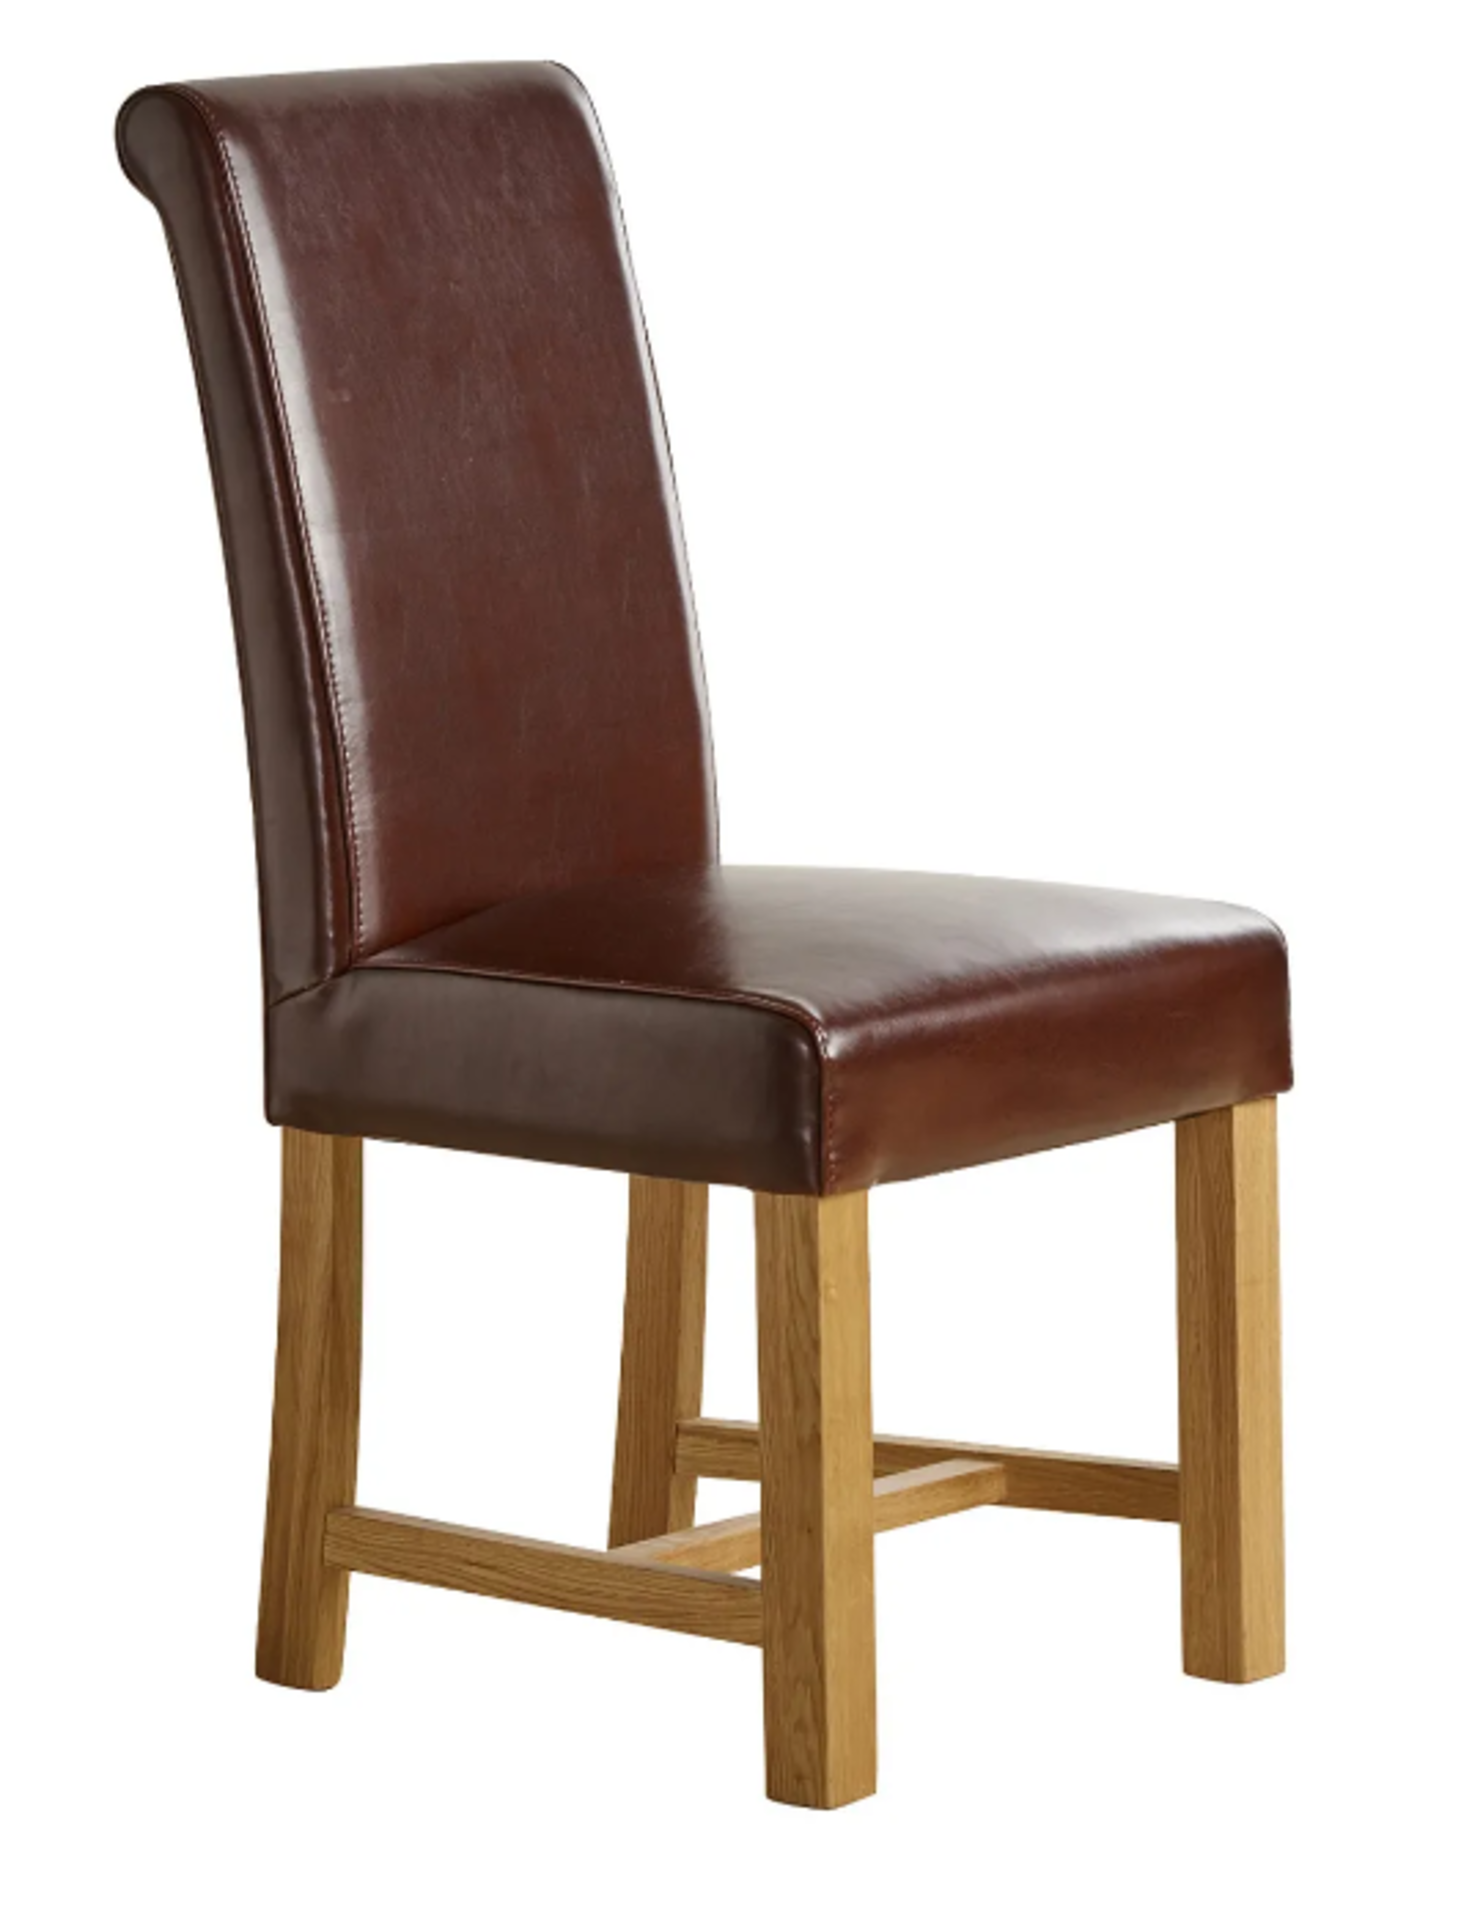 Pair of SCROLL BACK Brown Leather Dining Chair. RRP £220.00. ExLot 19- ROW7